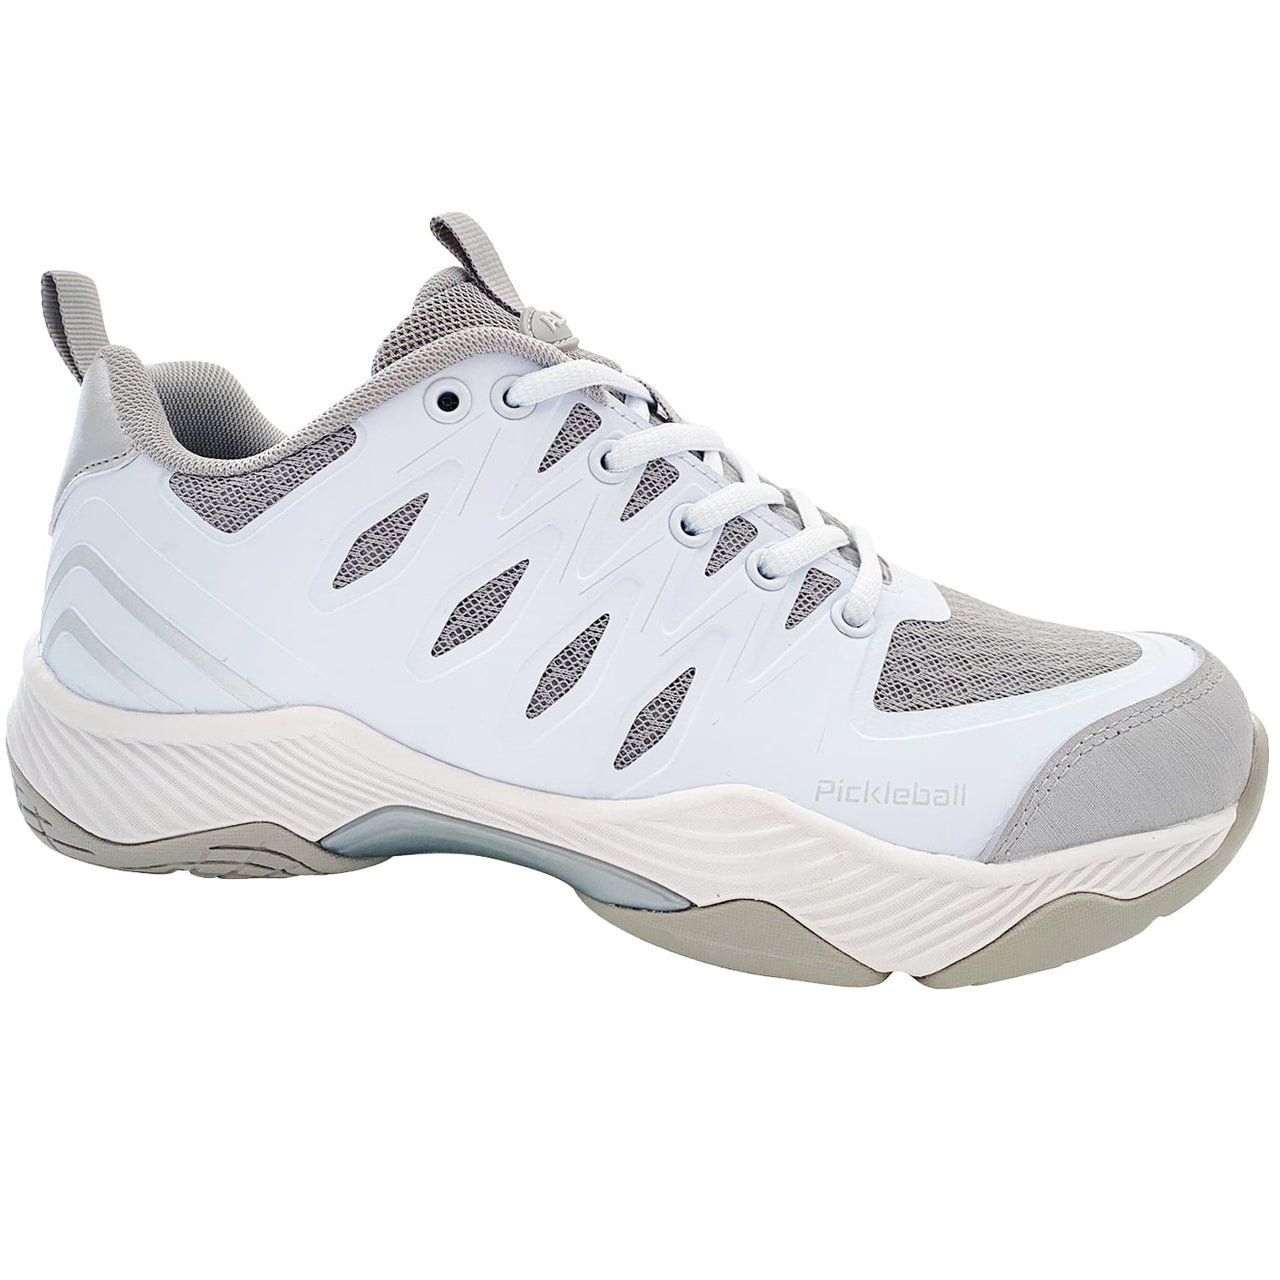 Acacia Sports - The “TYLER” Signature II Cloud Edition Pro Shoes